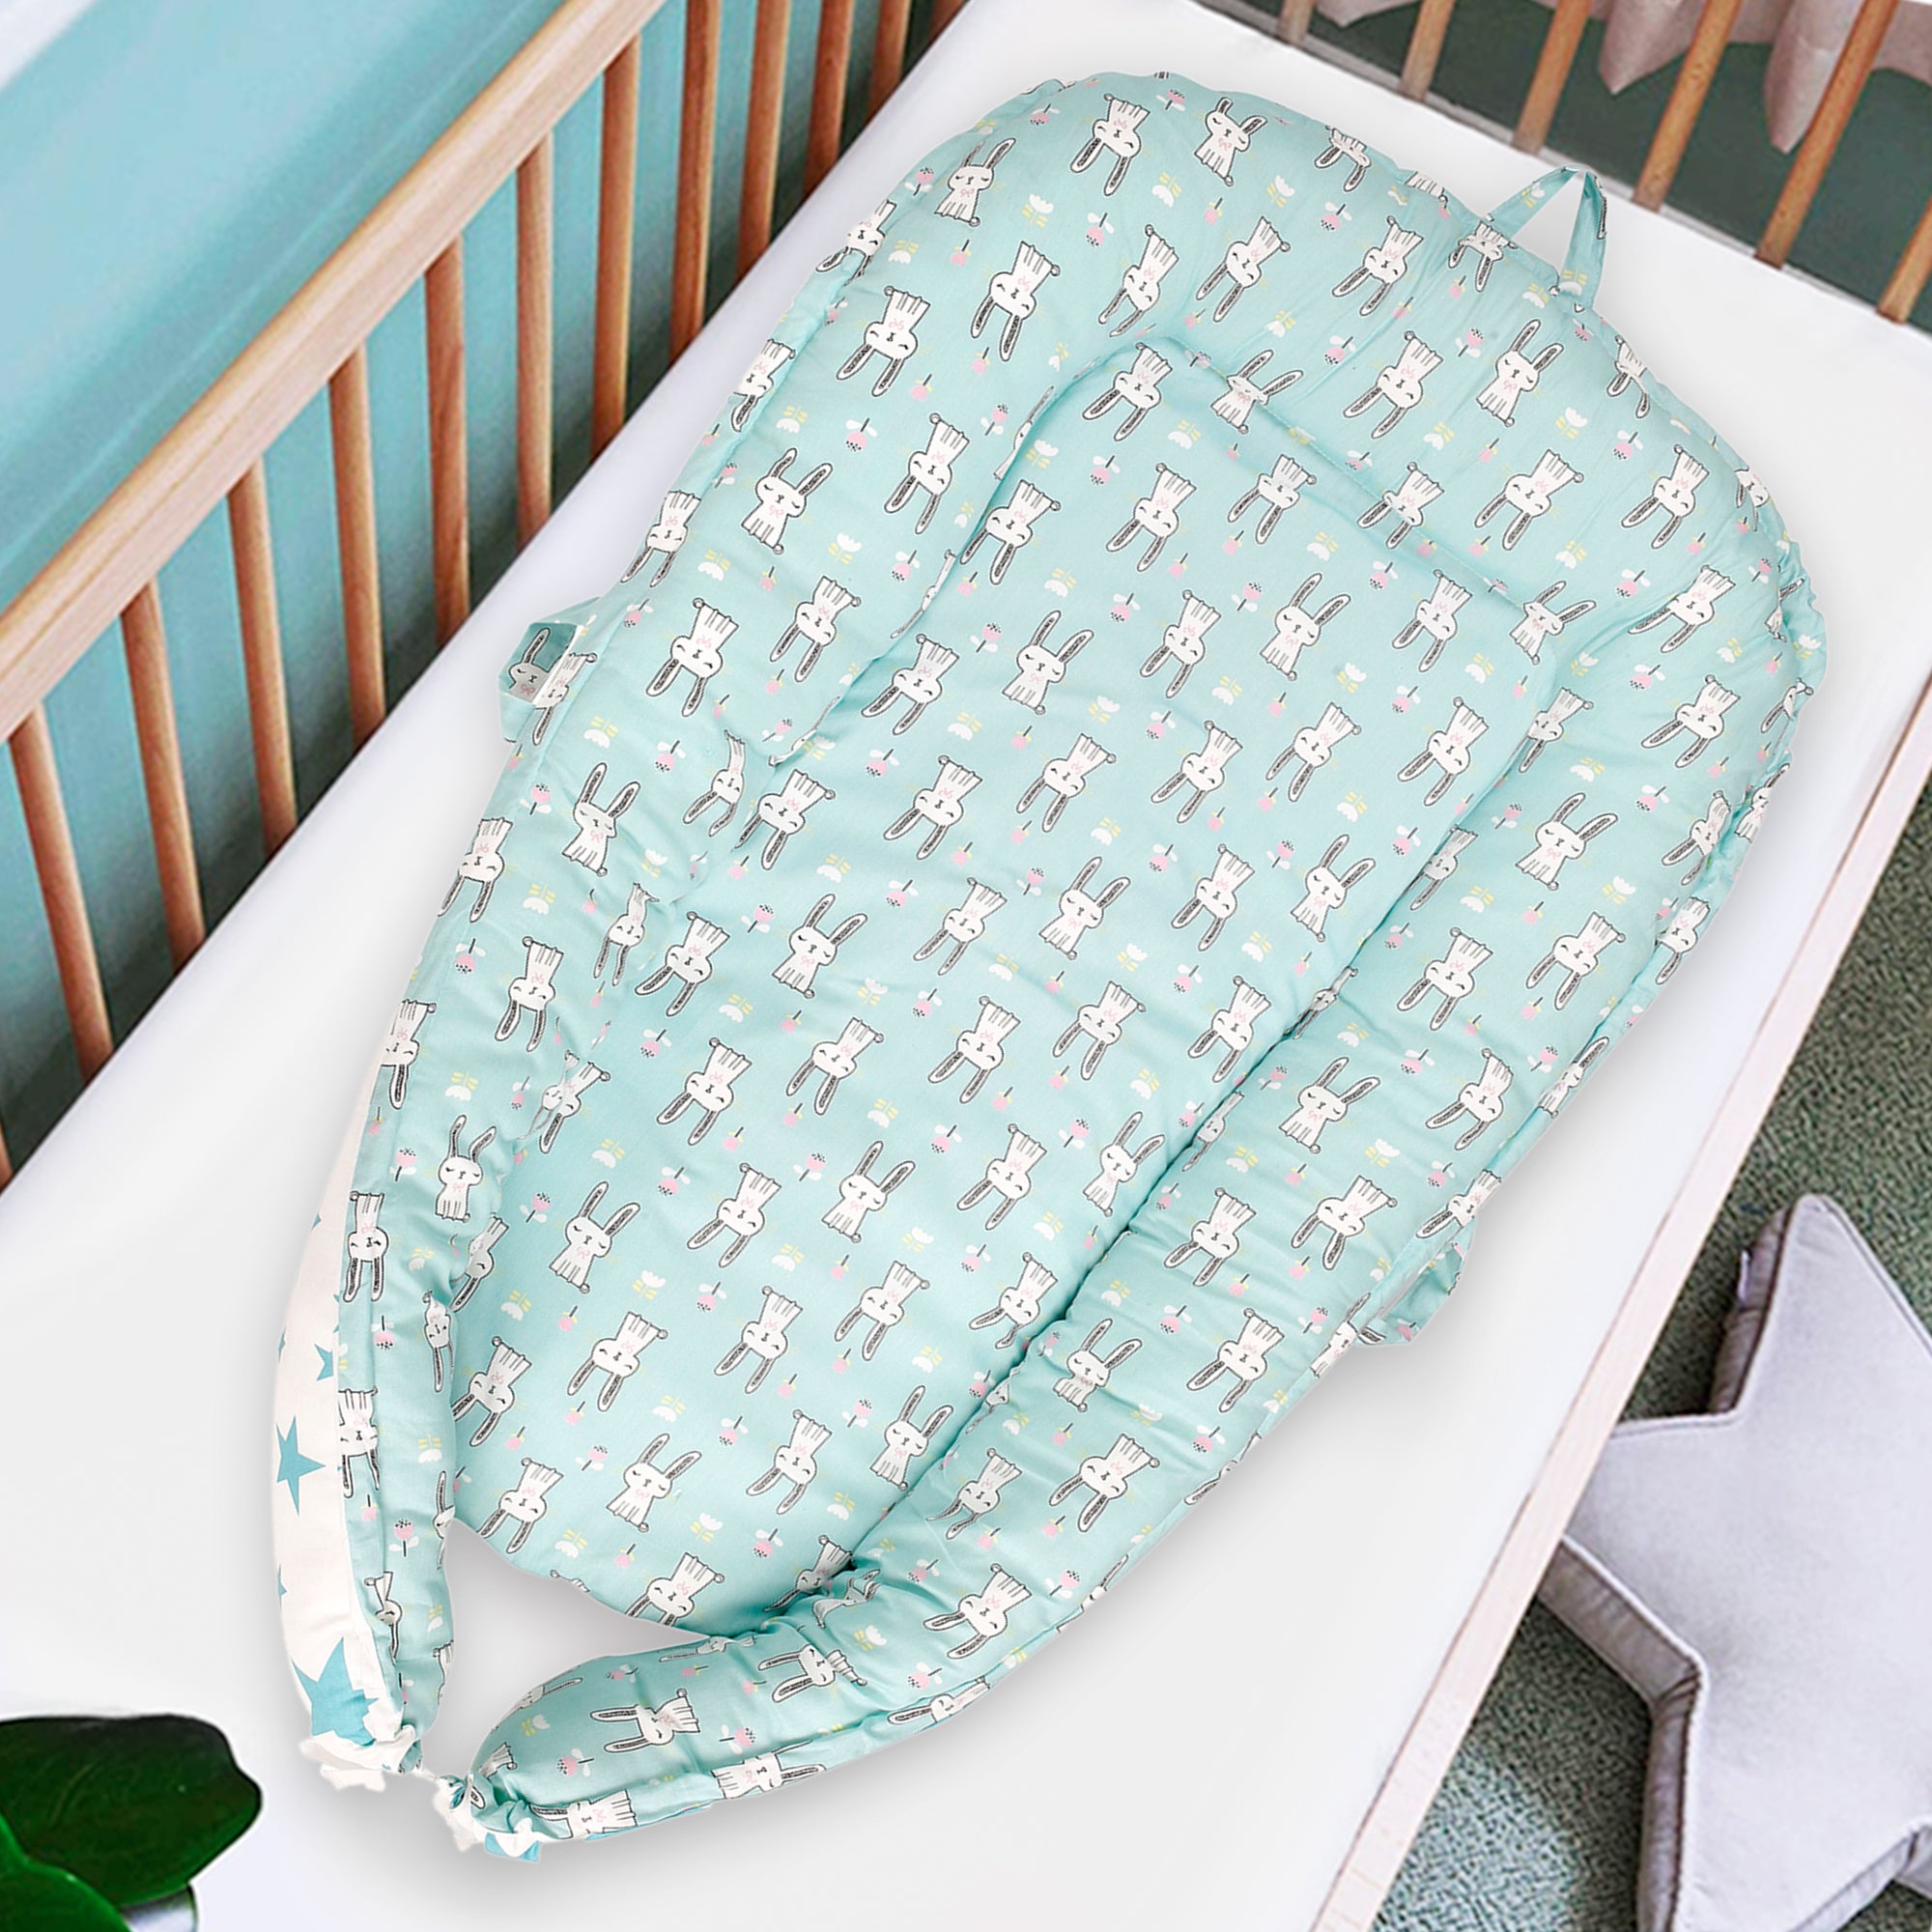 Baby Bed Cum Carry Nest Star And Rabbit Blue